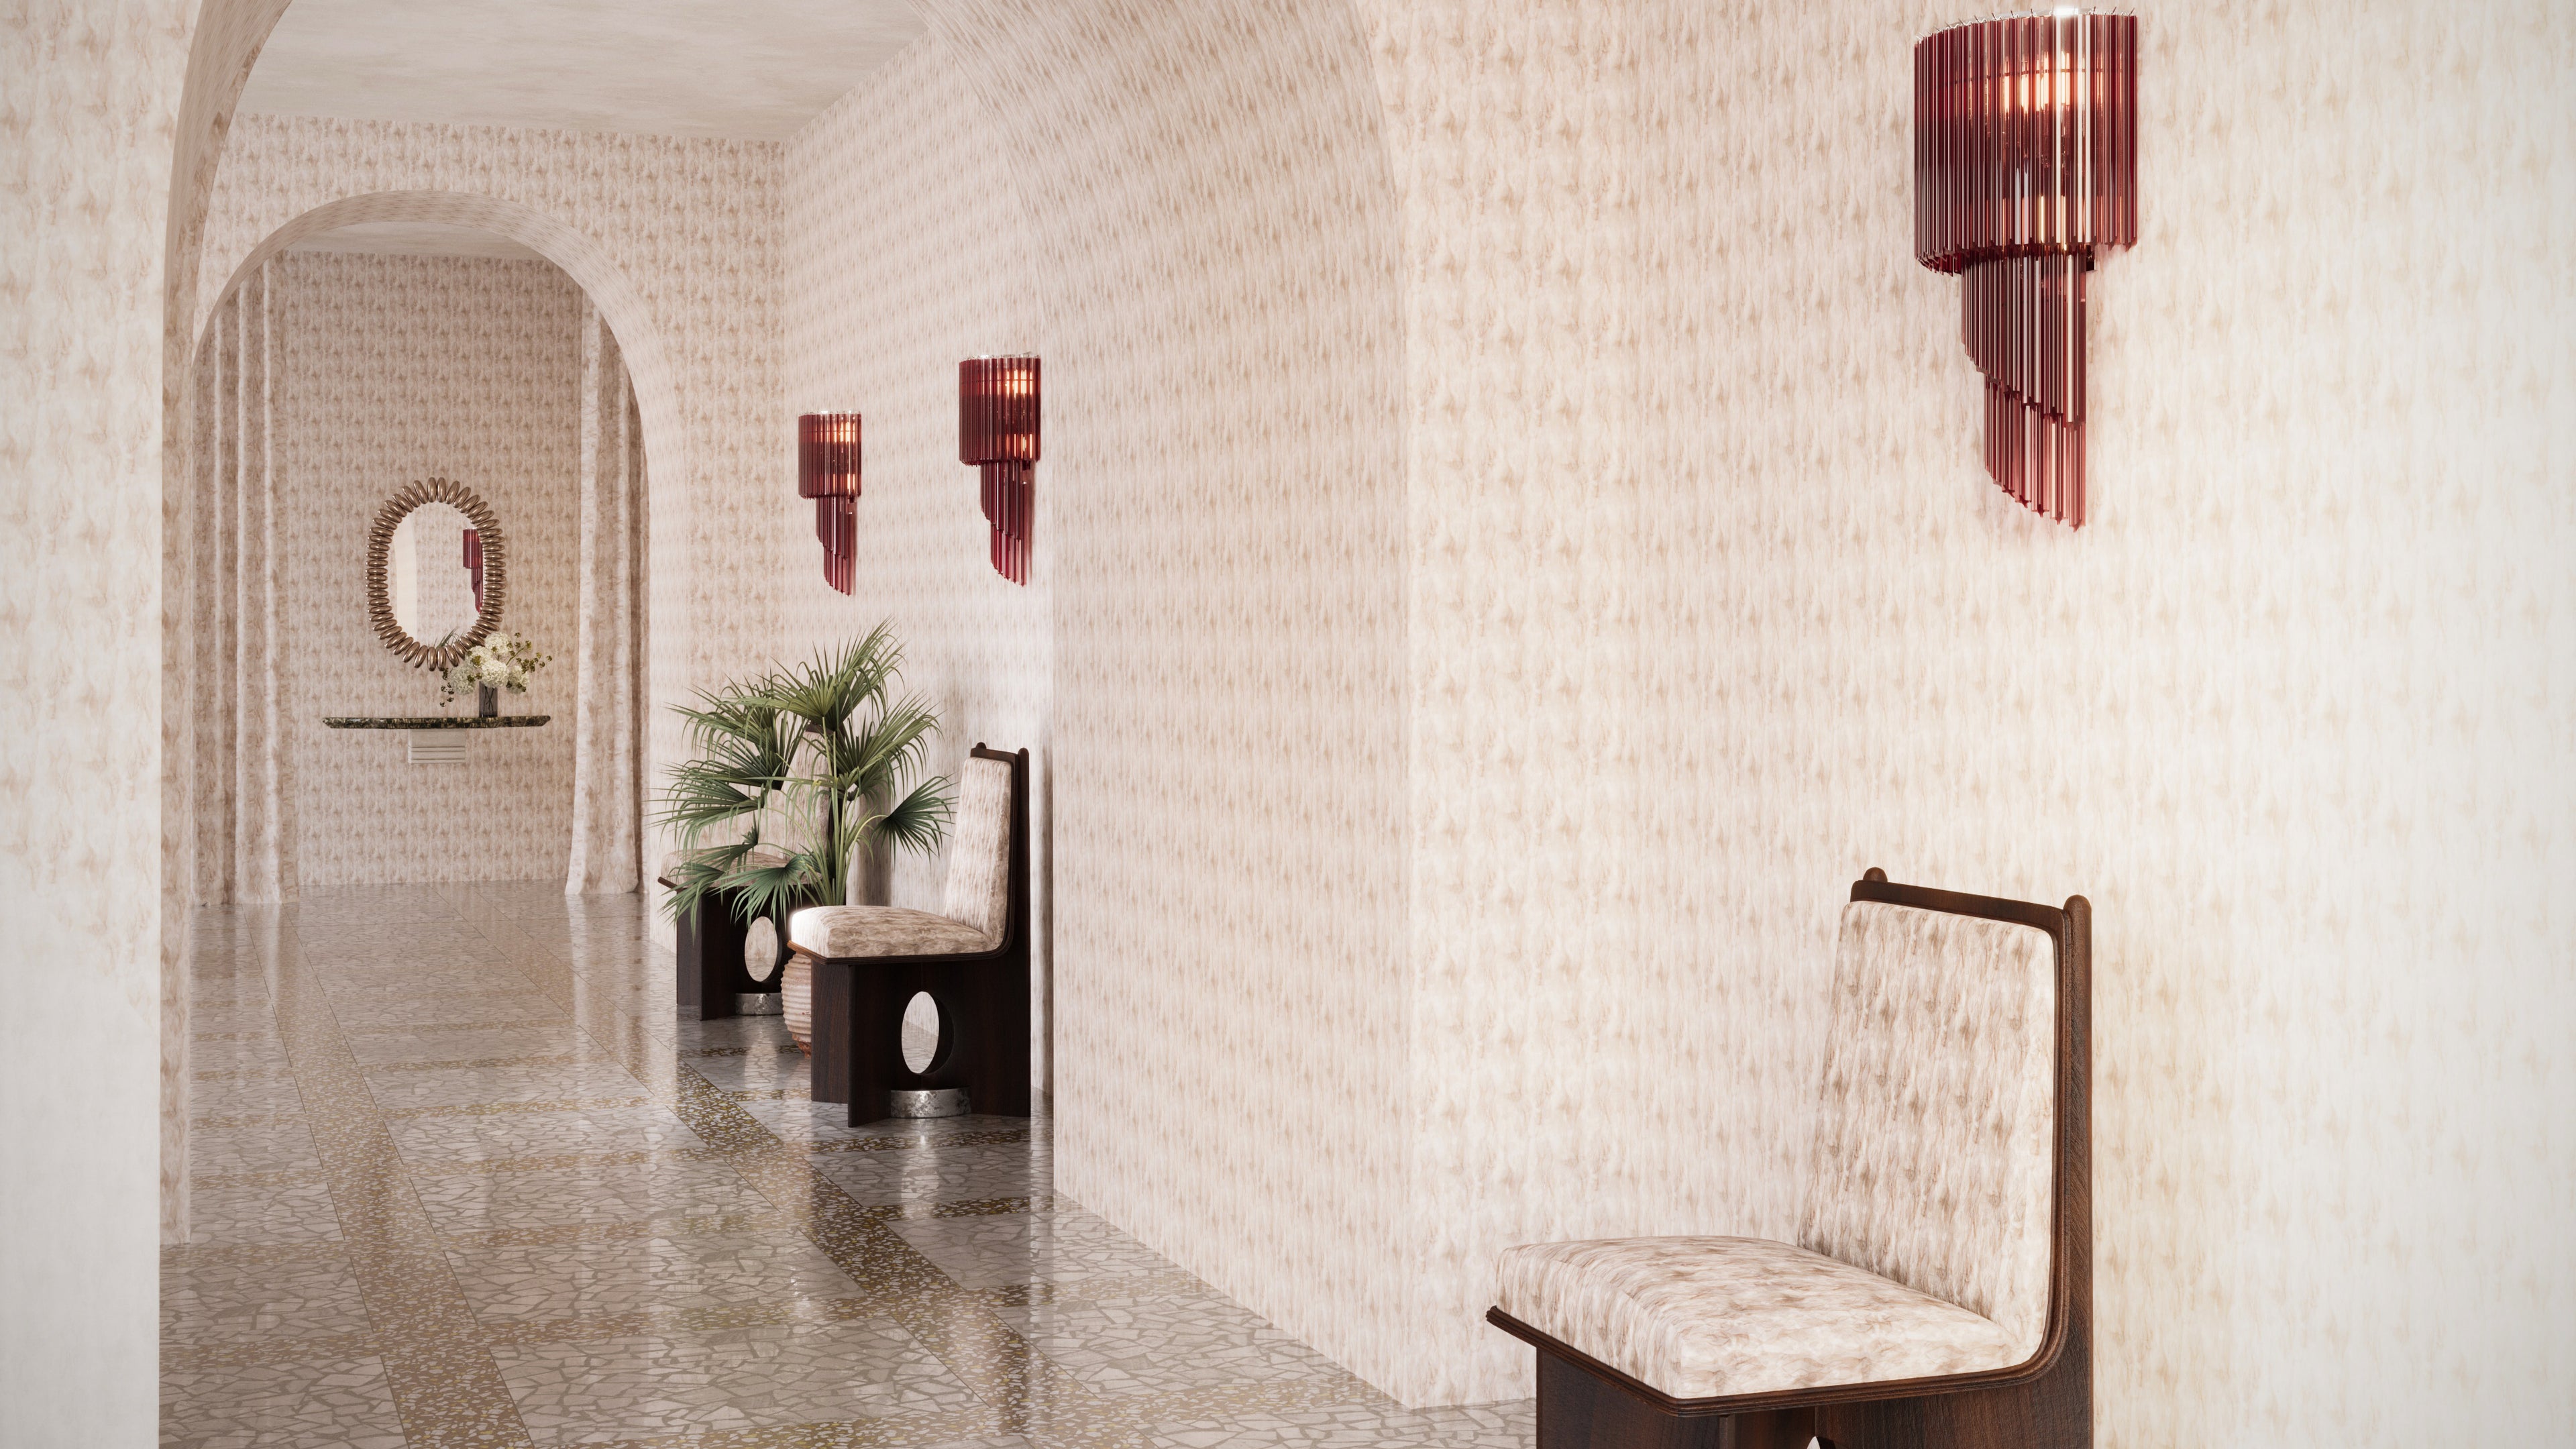 A hallway with chairs, wall sconces, and other decor with cascade quartz as wallpaper and fabric.